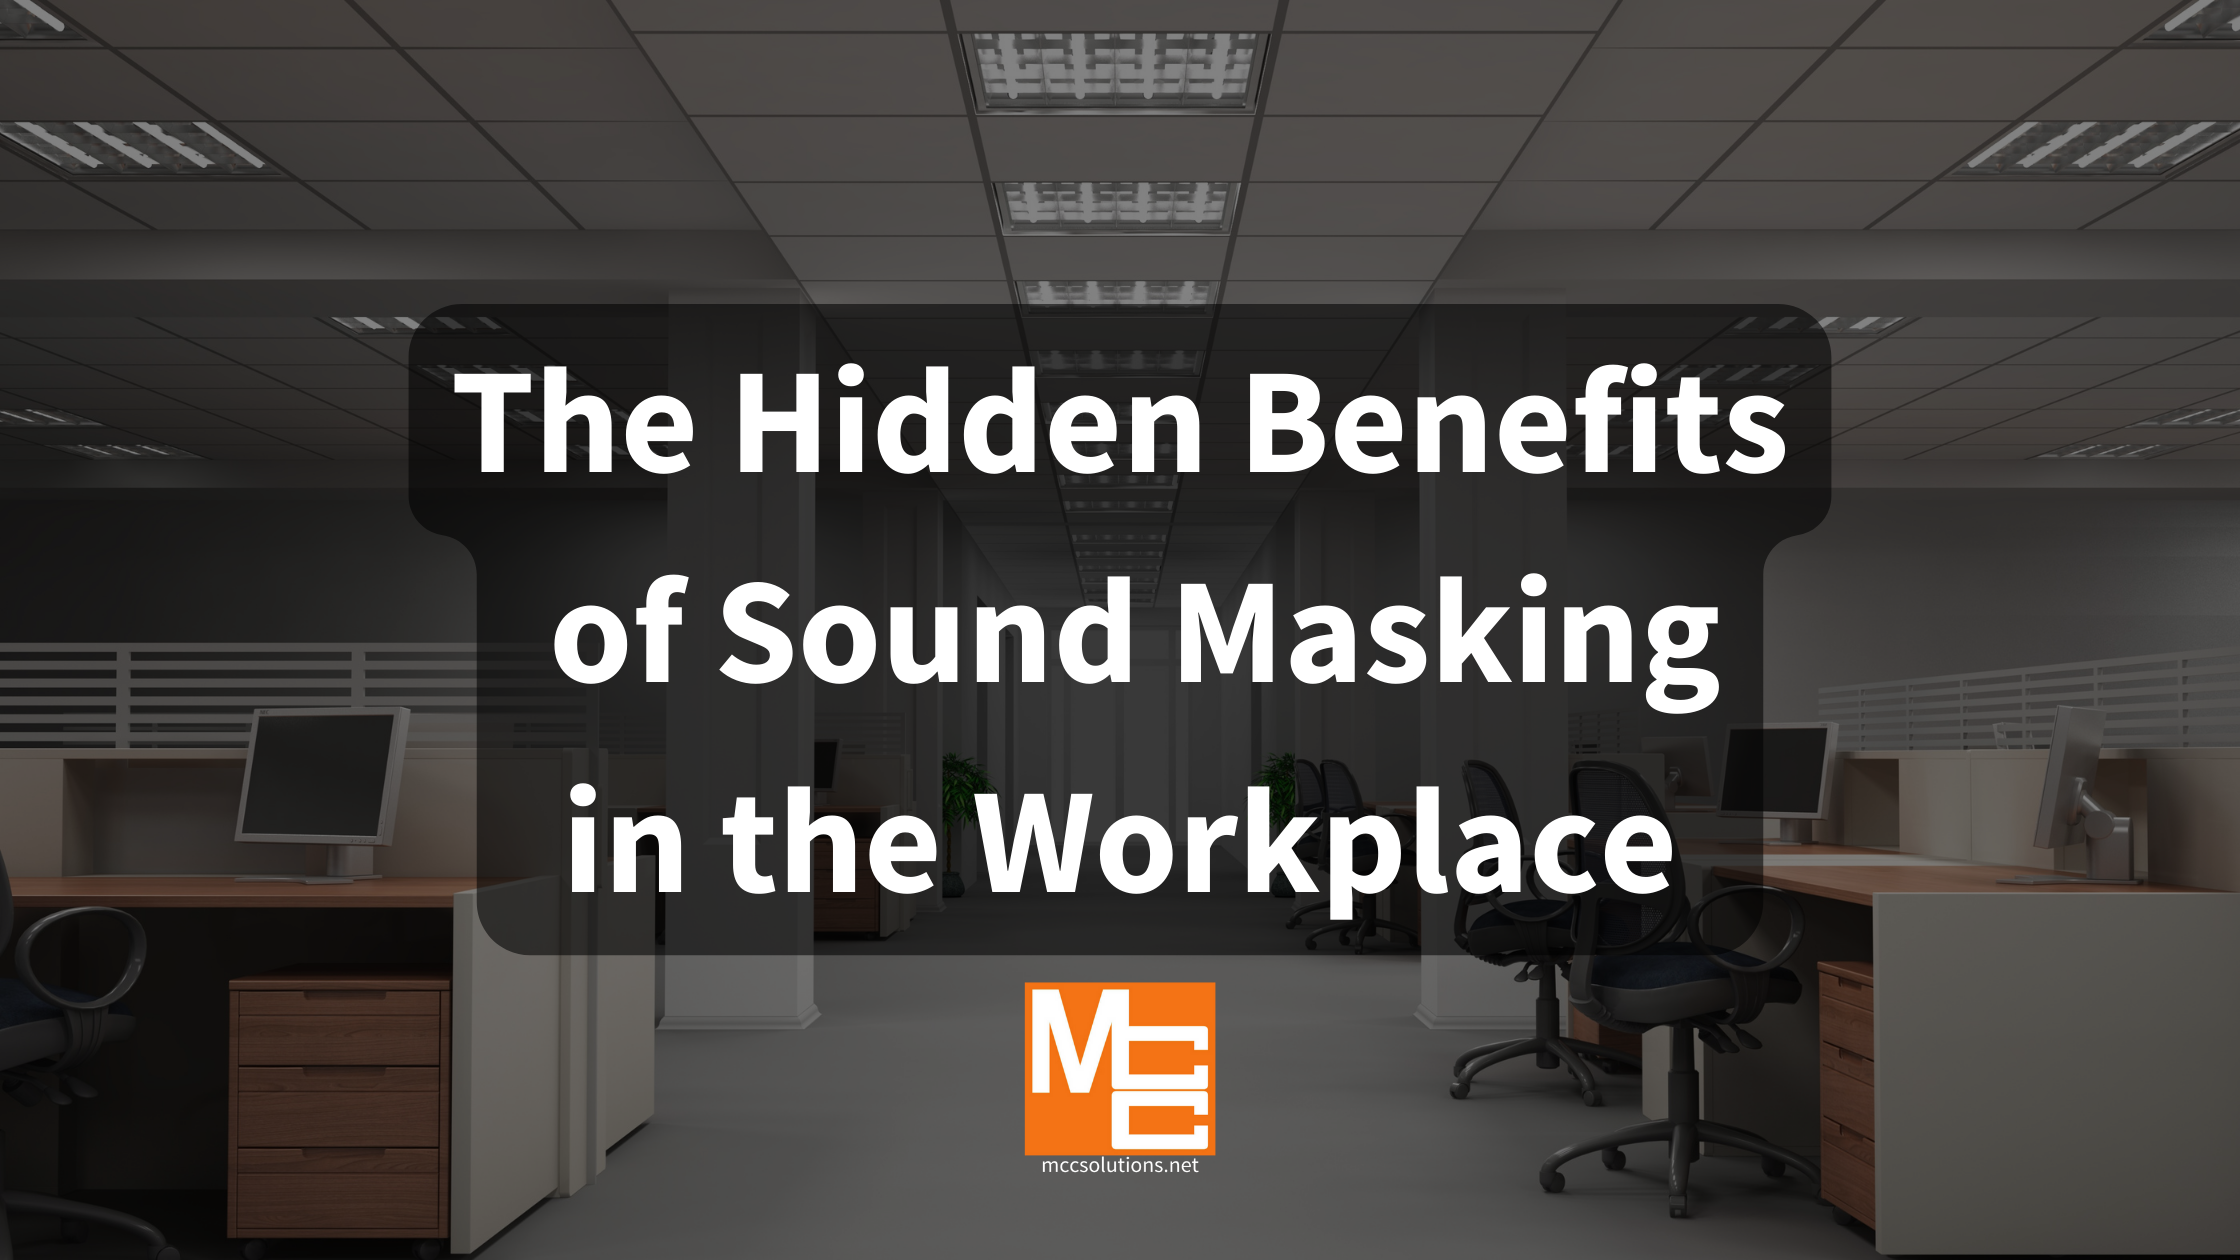 The Hidden Benefits of Sound Masking in the Workplace - blog post by MCC